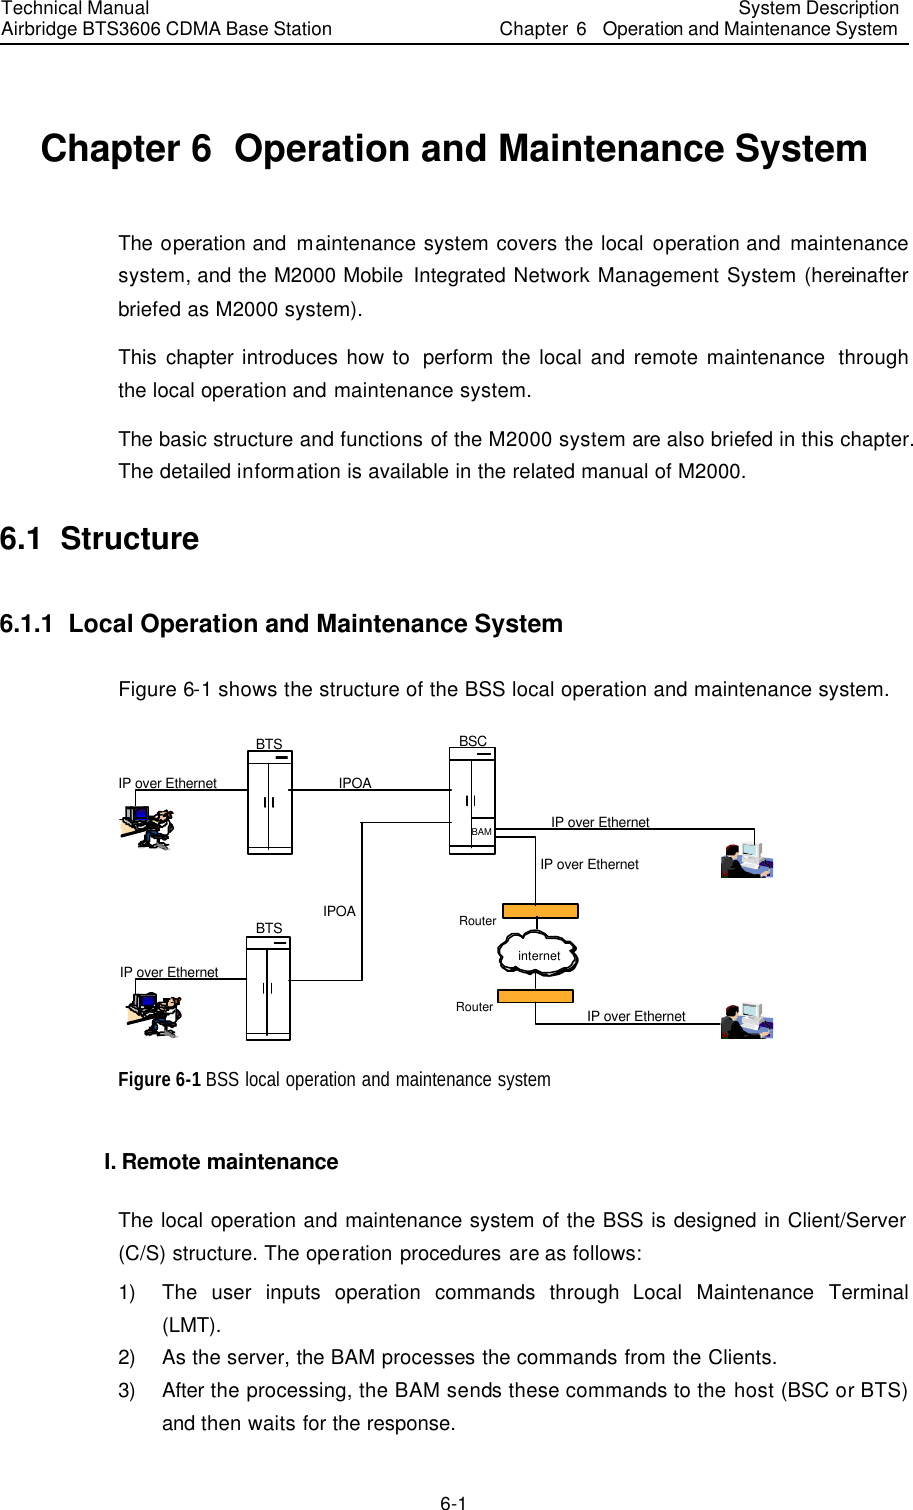 Technical Manual Airbridge BTS3606 CDMA Base Station System Description Chapter 6  Operation and Maintenance System   6-1 Chapter 6  Operation and Maintenance System The operation and maintenance system covers the local operation and maintenance system, and the M2000 Mobile Integrated Network Management System (hereinafter briefed as M2000 system).   This chapter introduces how to  perform the local and remote maintenance  through the local operation and maintenance system.   The basic structure and functions of the M2000 system are also briefed in this chapter. The detailed information is available in the related manual of M2000. 6.1  Structure 6.1.1  Local Operation and Maintenance System Figure 6-1 shows the structure of the BSS local operation and maintenance system. BTSBSCRouterRouterinternetIPOAIPOAIP over EthernetIP over EthernetIP over EthernetIP over EthernetIP over EthernetBTSBAM Figure 6-1 BSS local operation and maintenance system I. Remote maintenance The local operation and maintenance system of the BSS is designed in Client/Server (C/S) structure. The operation procedures are as follows: 1) The user inputs operation commands through Local Maintenance Terminal (LMT). 2) As the server, the BAM processes the commands from the Clients. 3) After the processing, the BAM sends these commands to the host (BSC or BTS) and then waits for the response. 